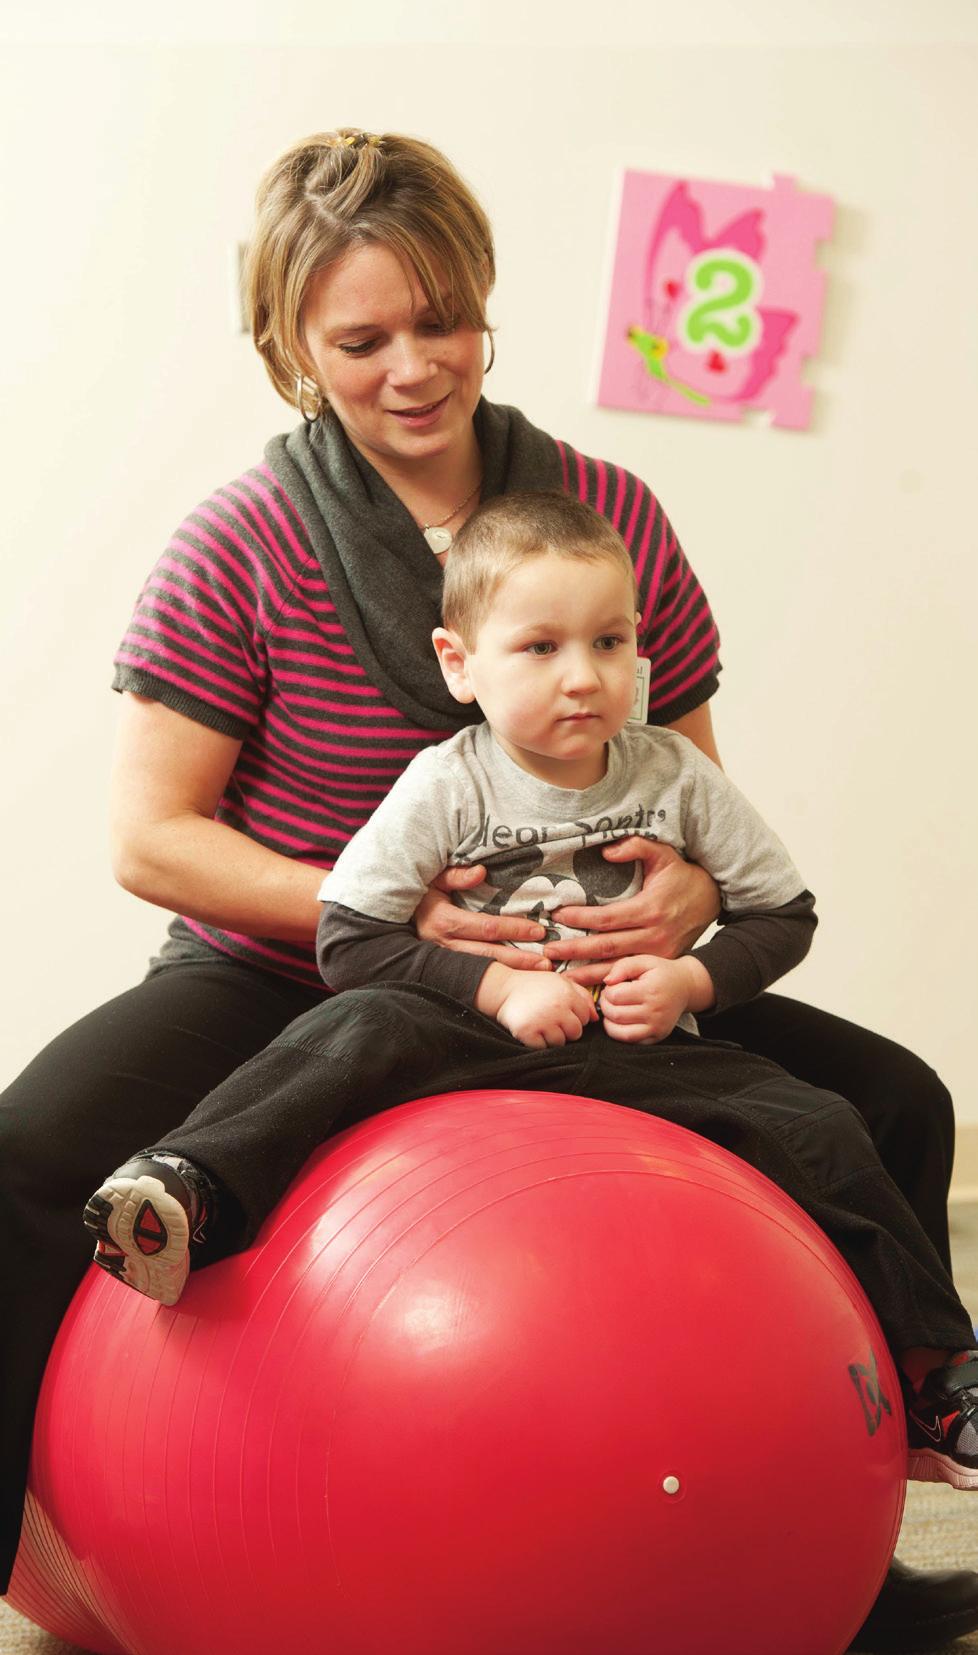 Our pediatric occupational therapy specialists provide intervention through play to improve basic living skills and social interactions. A growing demand.